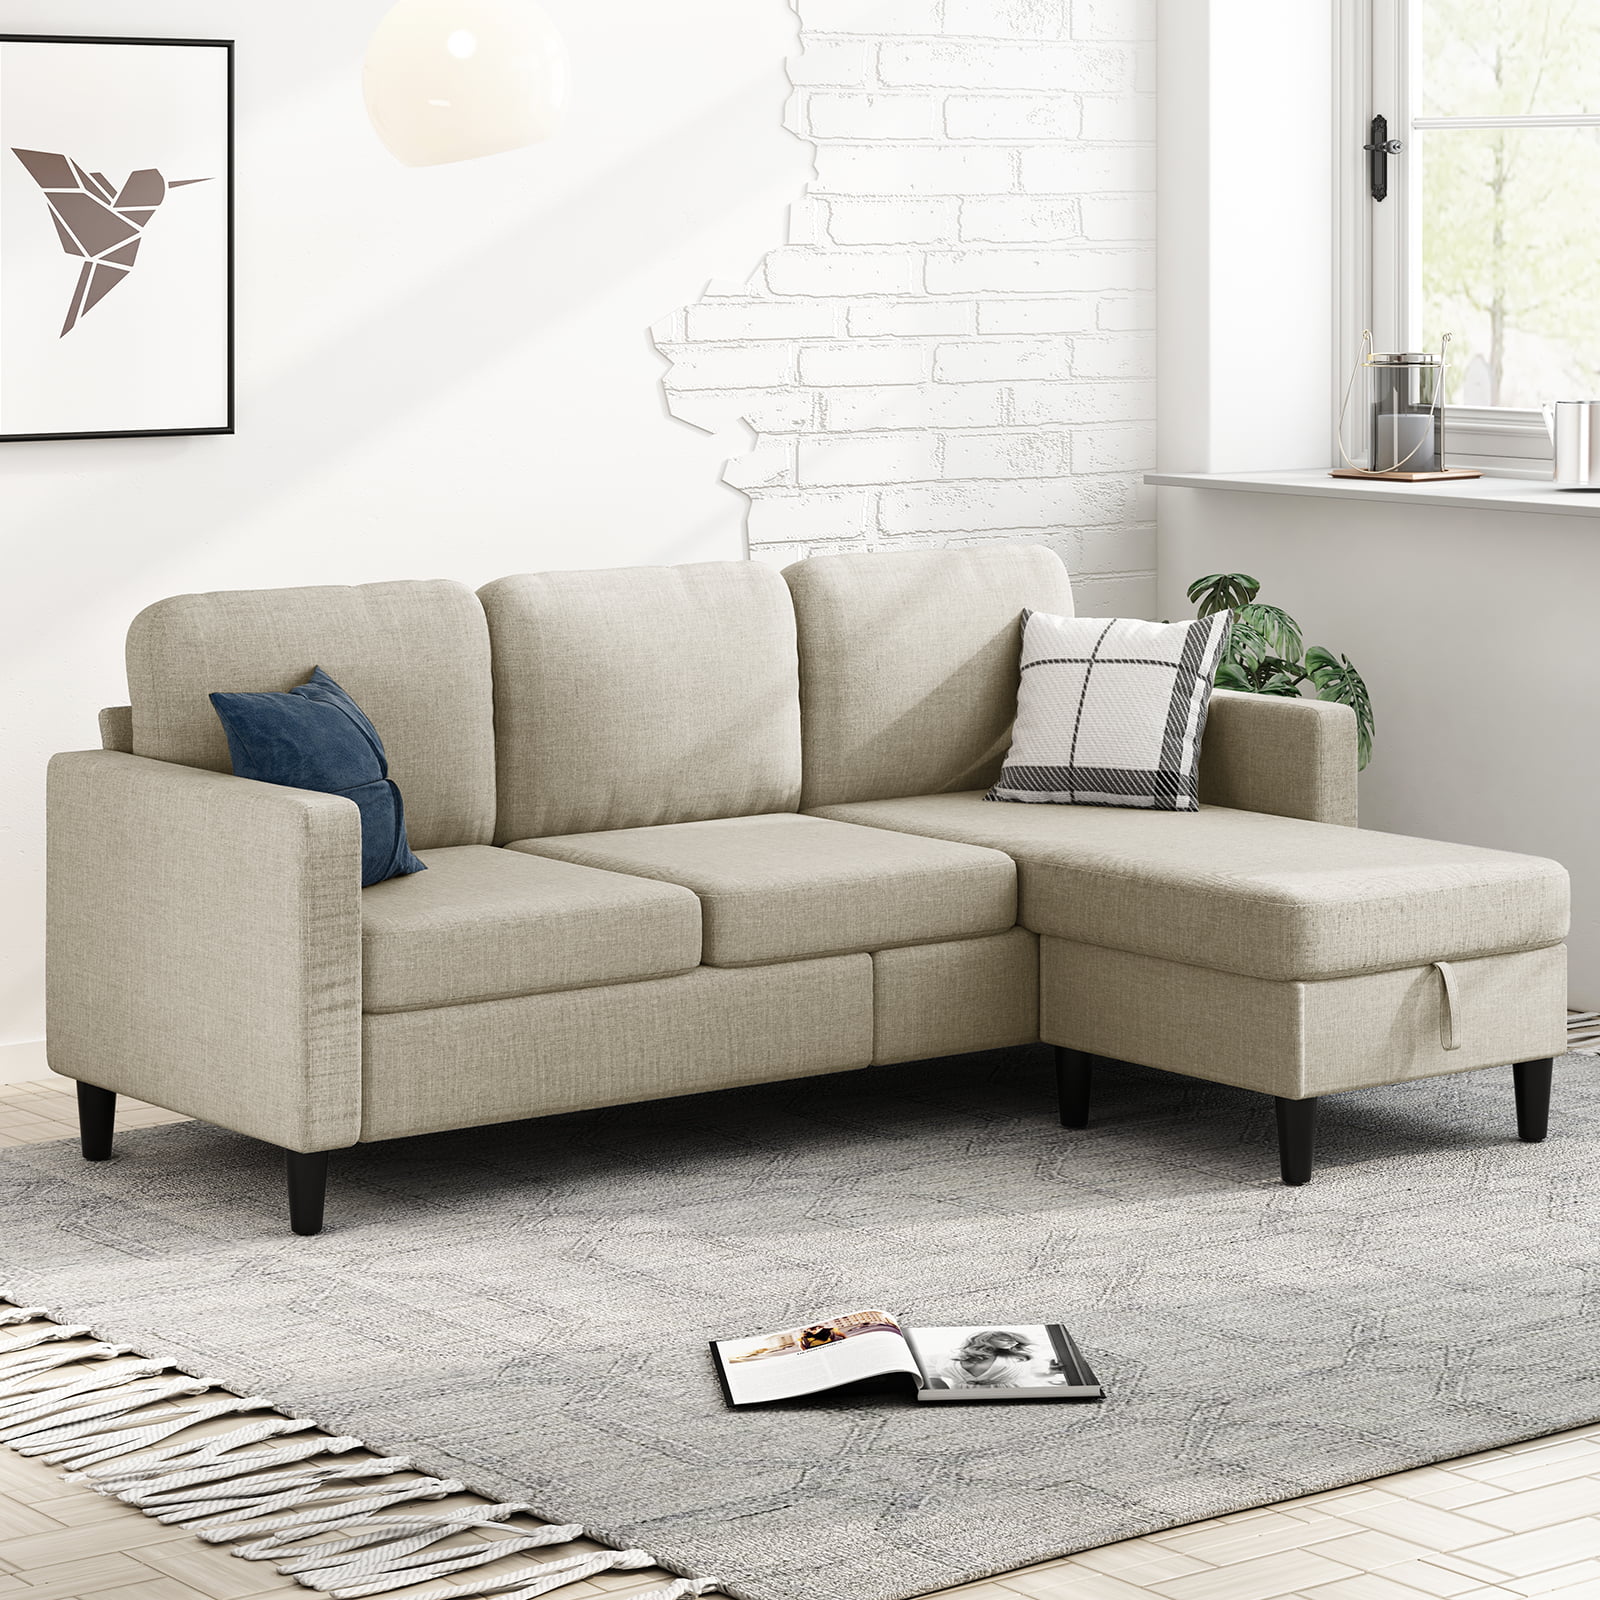 MUZZ Sectional Sofa with Movable Ottoman, Free Combination Sectional Couch, Small L Shaped Sectional Sofa with Storage Ottoman,Linen Fabric Wood Frame Sofa Set for Living Room (Beige) - image 1 of 6